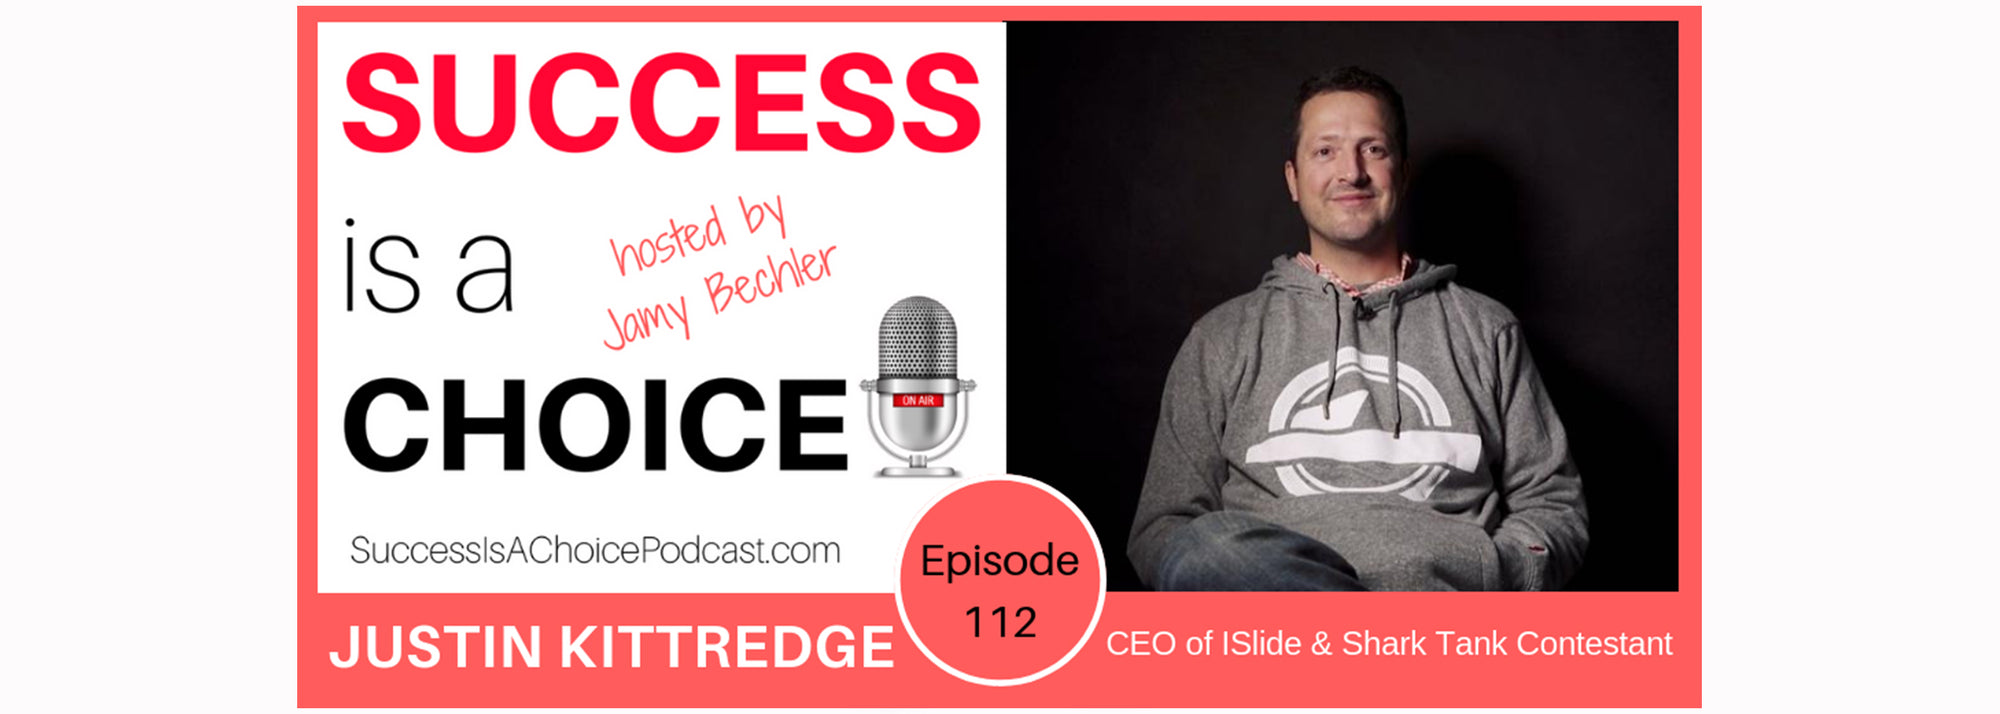 Founder and CEO, Justin Kittredge, Appears on the Success Is A Choice Podcast